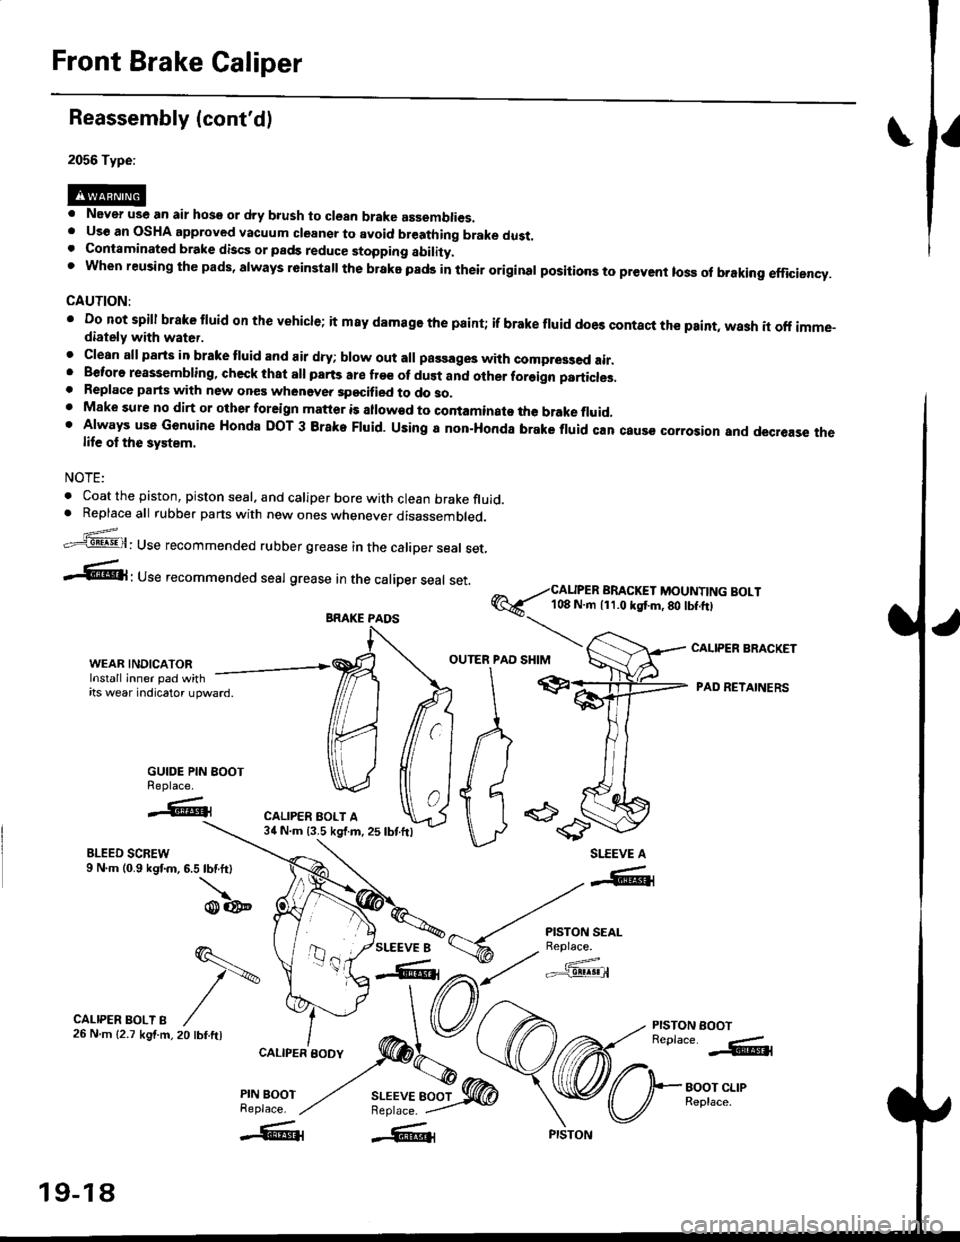 HONDA CIVIC 1996 6.G Workshop Manual Front Brake Caliper
Reassembly (contd)
2056 Type:
. Never use an air hose or dry b.ush to clean brake assemblies.. Uso an OSHA approved vacuum cleansr to avoid breathing brake dust.. Contaminated bra